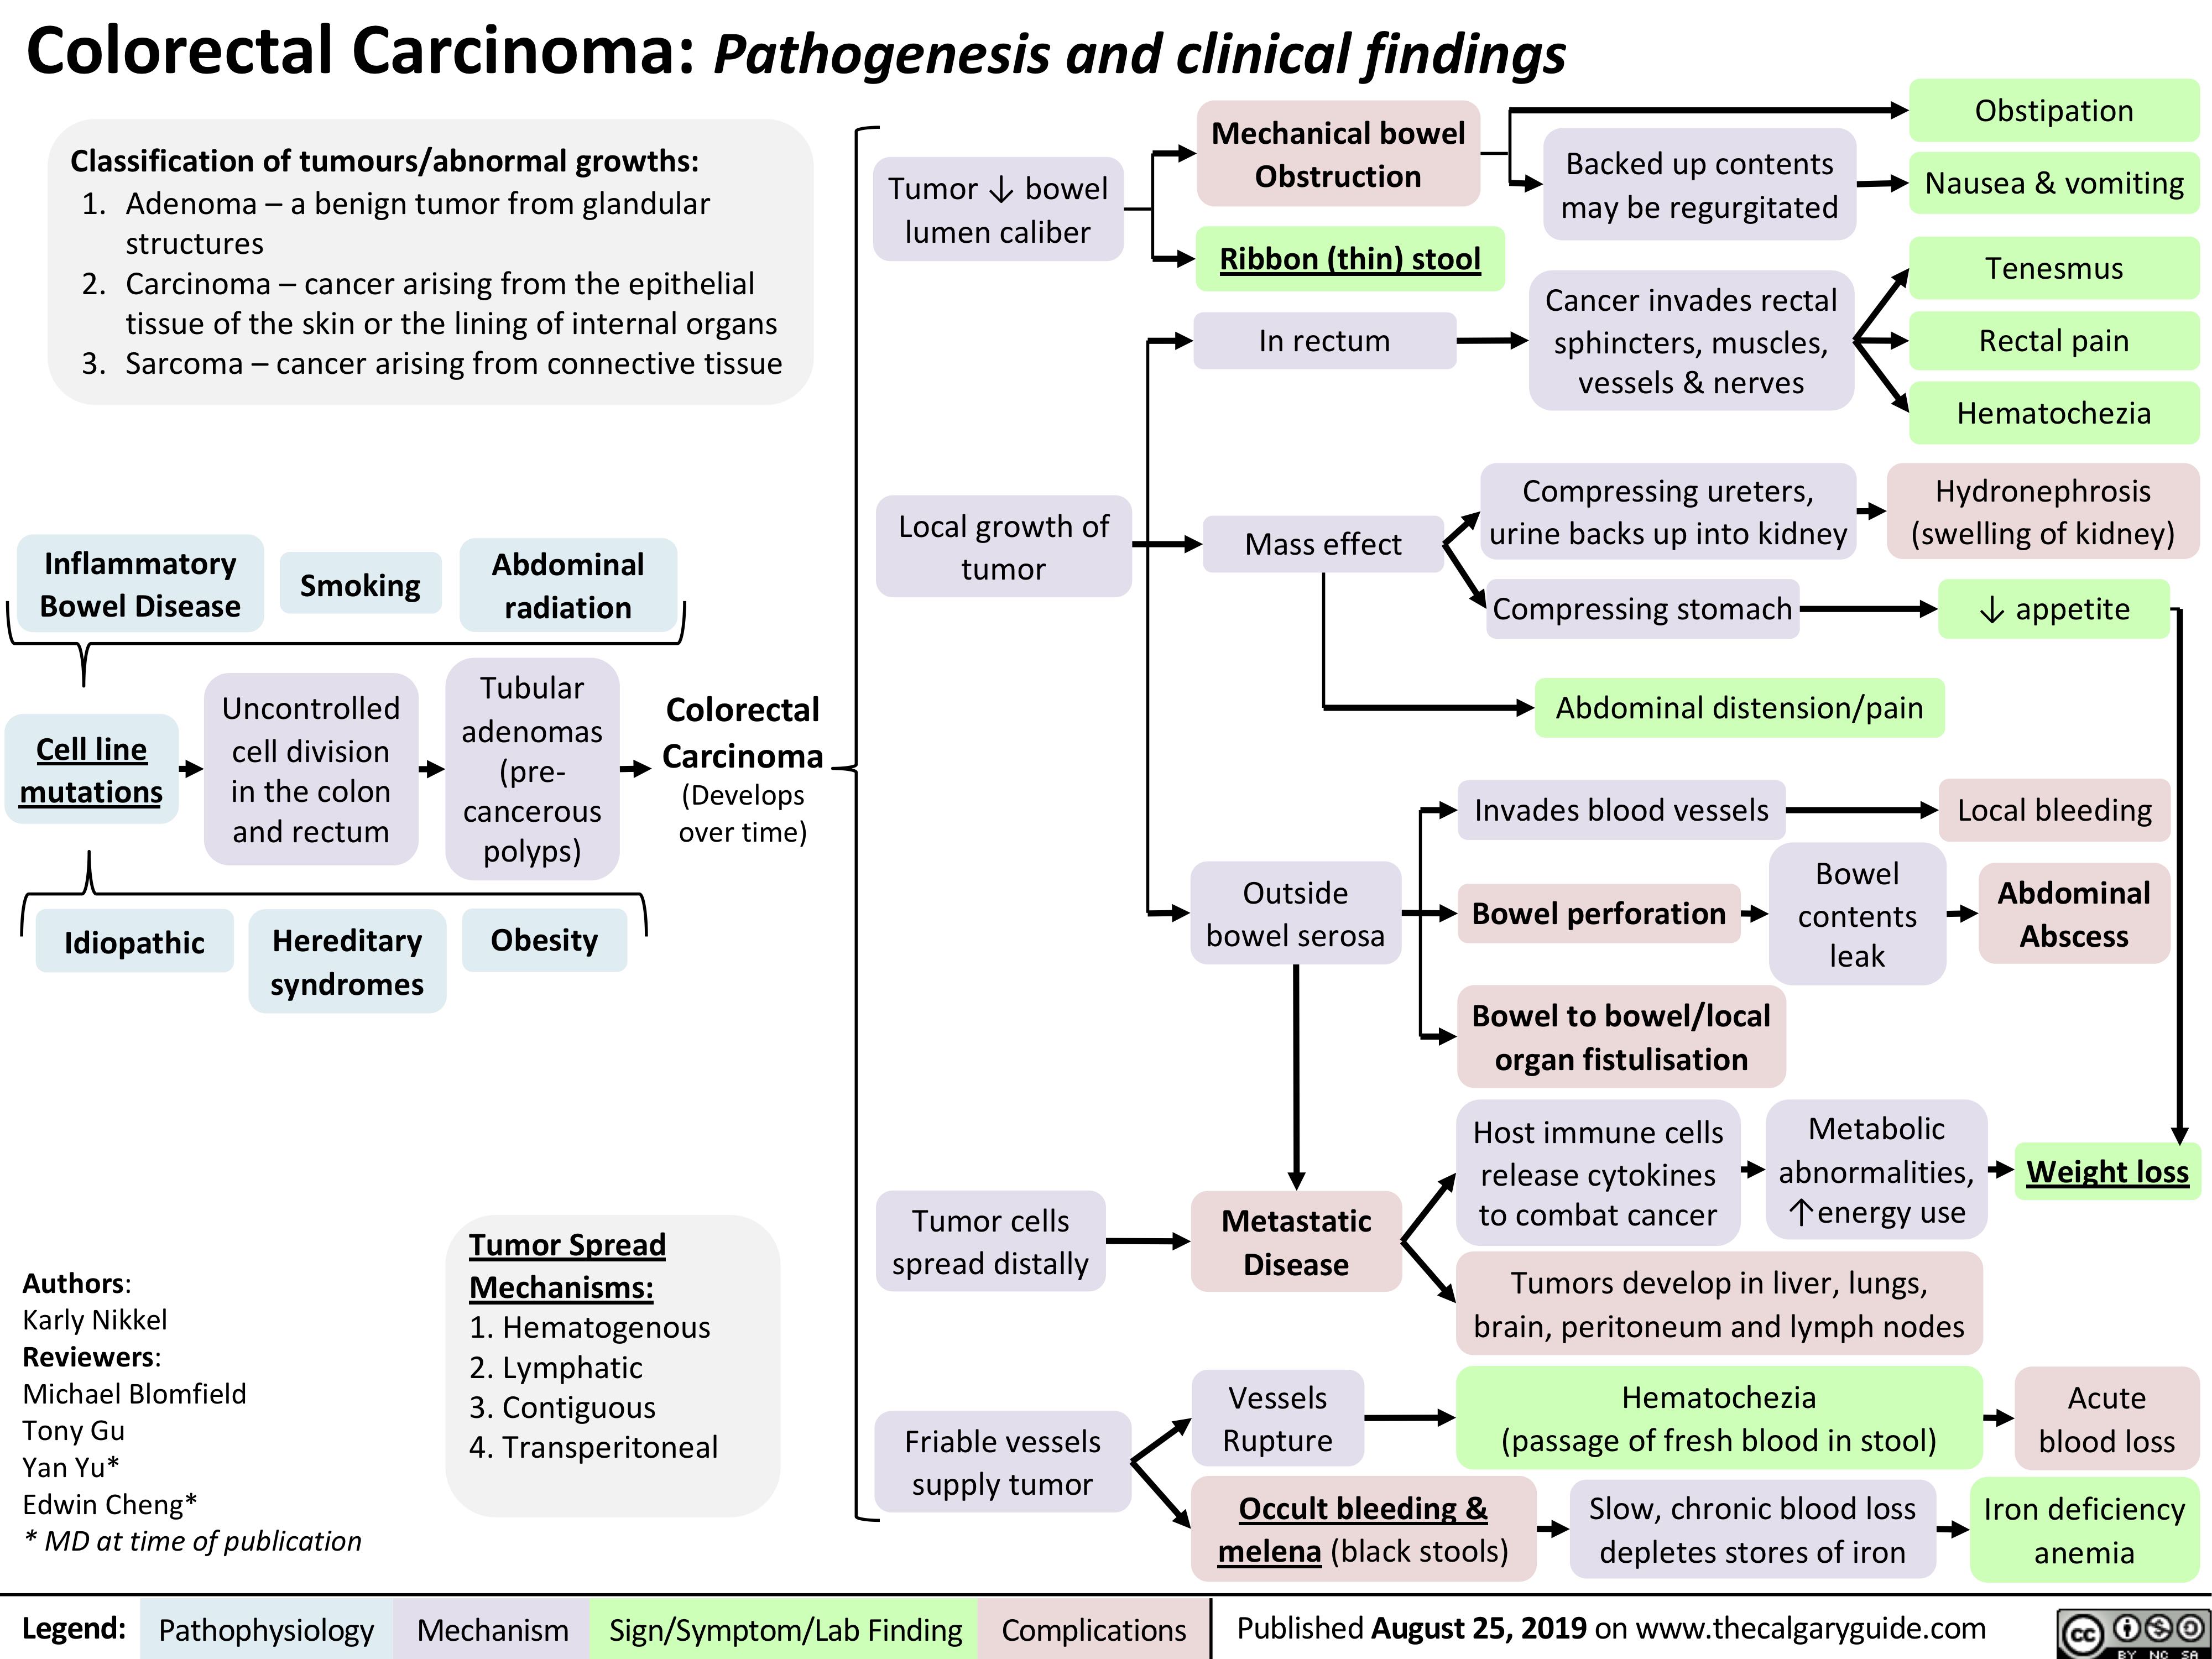 Colorectal Carcinoma: Pathogenesis and clinical findings
Obstipation Nausea & vomiting
Tenesmus Rectal pain Hematochezia
Hydronephrosis (swelling of kidney)
↓ appetite
Local bleeding
Abdominal Abscess
Weight loss
Acute blood loss
Iron deficiency anemia
     Classification of tumours/abnormal growths:
1. Adenoma–abenigntumorfromglandular structures
2. Carcinoma–cancerarisingfromtheepithelial tissue of the skin or the lining of internal organs
3. Sarcoma–cancerarisingfromconnectivetissue
Mechanical bowel Obstruction
Ribbon (thin) stool
In rectum
Mass effect
    Tumor ↓ bowel lumencaliber
Backed up contents mayberegurgitated
Cancerinvadesrectal sphincters, muscles, vessels&nerves
Compressing ureters, urine backs up into kidney
Compressing stomach
Abdominal distension/pain Invades blood vessels
                     Inflammatory
Bowel Disease Smoking
Abdominal radiation
Tubular adenomas
(pre- cancerous polyps)
Obesity
Local growth of tumor
             Cell line mutations
Idiopathic
Uncontrolled cell division in the colon and rectum
Hereditary syndromes
Colorectal Carcinoma
(Develops over time)
            Outside bowel serosa
Bowel perforation
Bowel to bowel/local organ fistulisation
Host immune cells release cytokines to combat cancer
Bowel contents leak
Metabolic abnormalities, ↑energy use
                     Tumor Spread Mechanisms:
1. Hematogenous 2. Lymphatic
3. Contiguous
4. Transperitoneal
Tumor cells spread distally
Friable vessels supply tumor
Metastatic Disease
Vessels Rupture
Occult bleeding &
melena (black stools) depletes stores of iron
  Authors:
Karly Nikkel
Reviewers:
Michael Blomfield
Tony Gu
Yan Yu*
Edwin Cheng*
* MD at time of publication
Tumors develop in liver, lungs, brain, peritoneum and lymph nodes
Hematochezia (passage of fresh blood in stool)
          Slow, chronic blood loss
  Legend:
 Pathophysiology
Mechanism
Sign/Symptom/Lab Finding
  Complications
Published August 25, 2019 on www.thecalgaryguide.com
    